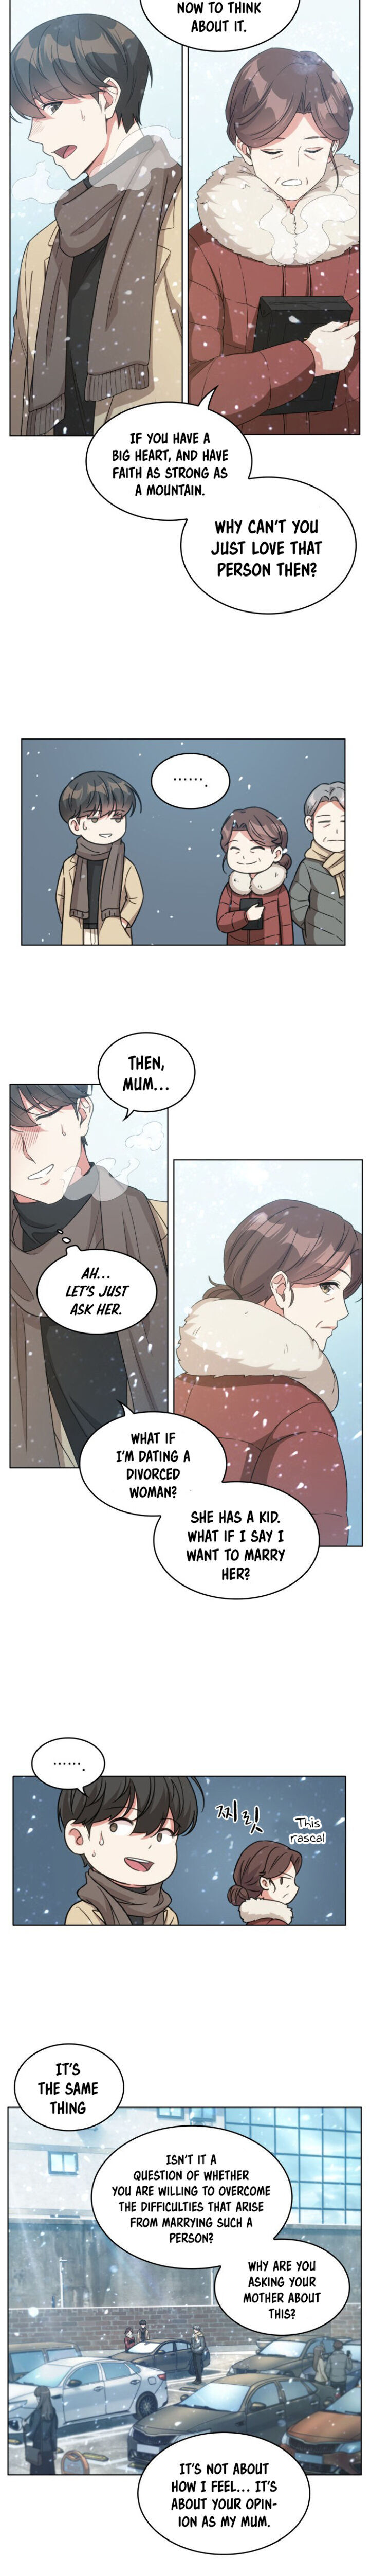 My Office Noona’s Story - Chapter 20 Page 15